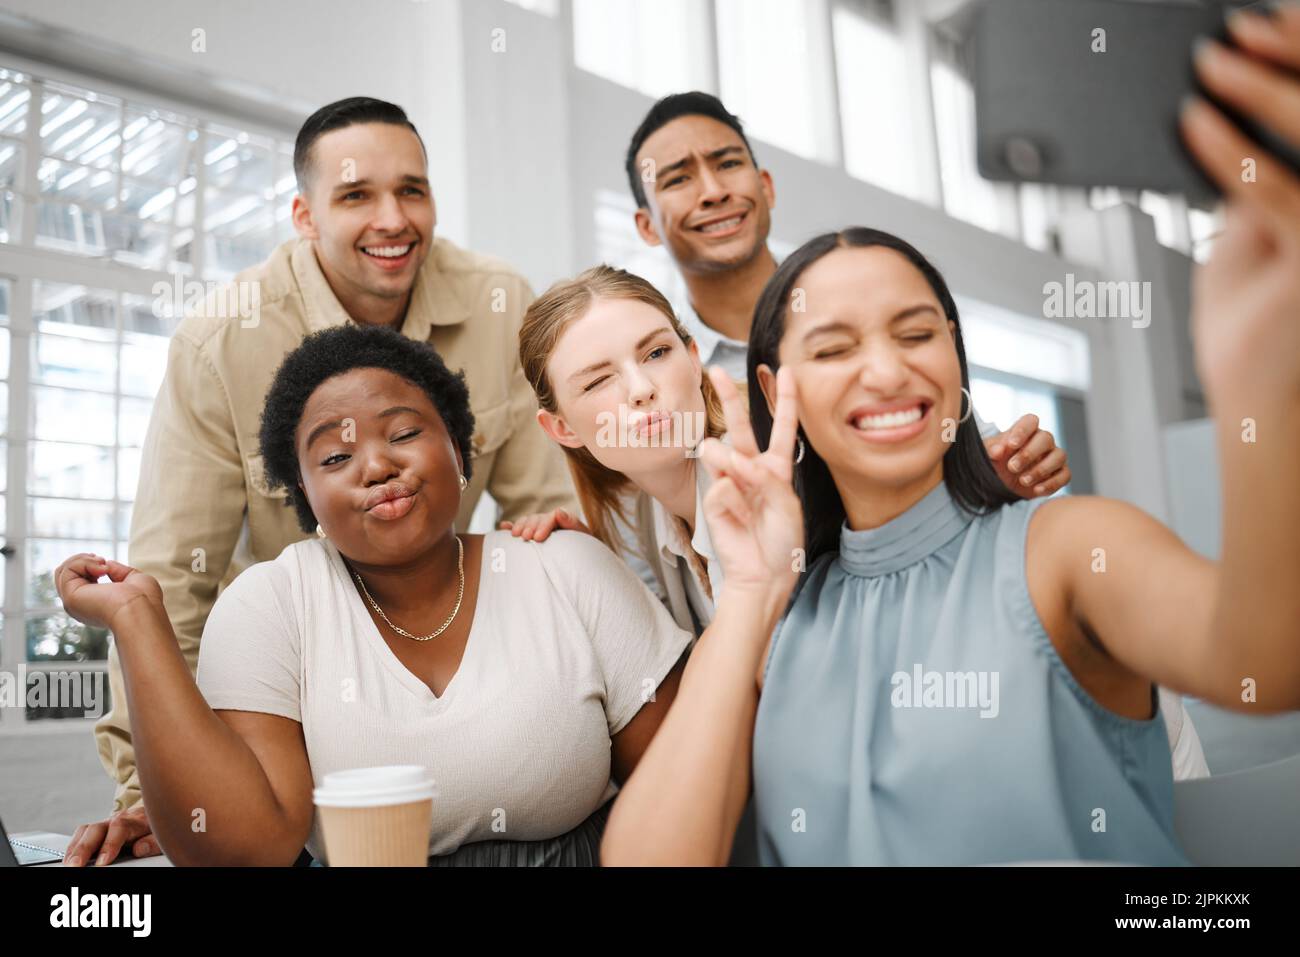 Fun, goofy or playful team selfie on phone and having fun, goofing around or making silly face expressions. Diverse or cheerful group of business Stock Photo